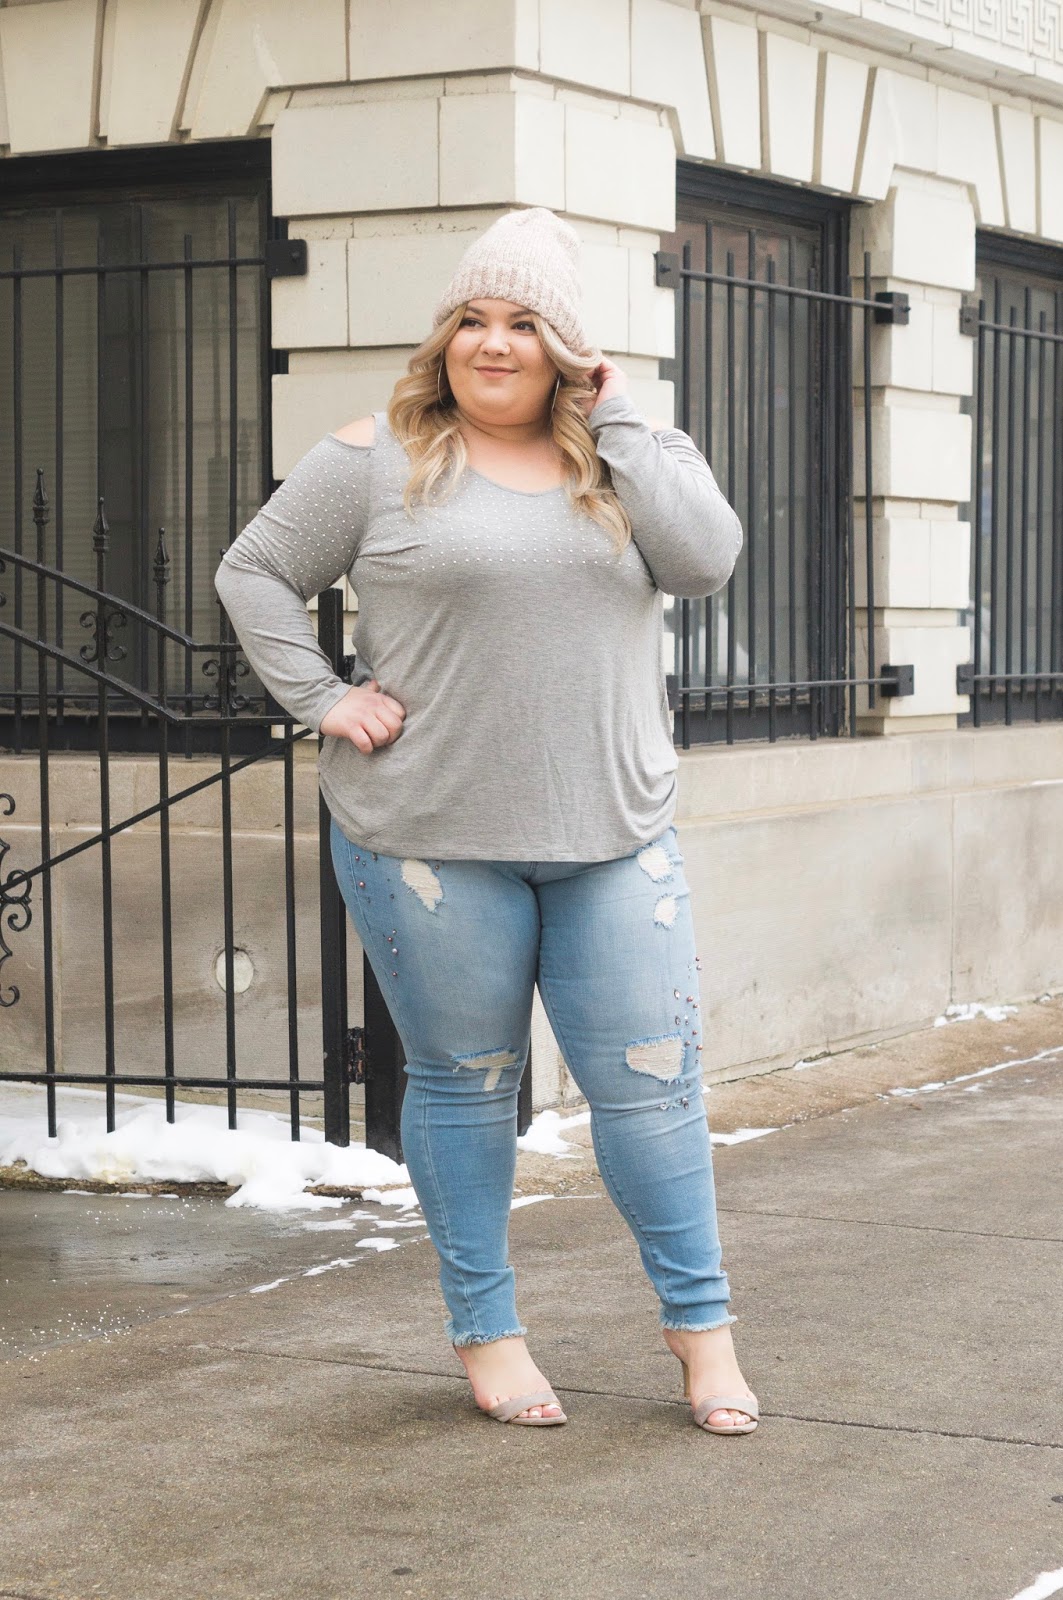 natalie in the city, natalie craig, plus size fashion blogger, Chicago fashion blogger, plus size fashion, affordable plus size clothing, embrace your curves, off your beauty standards. body positive, curves and confidence, rebel wilson x angels, pearl jeans, plus size denim